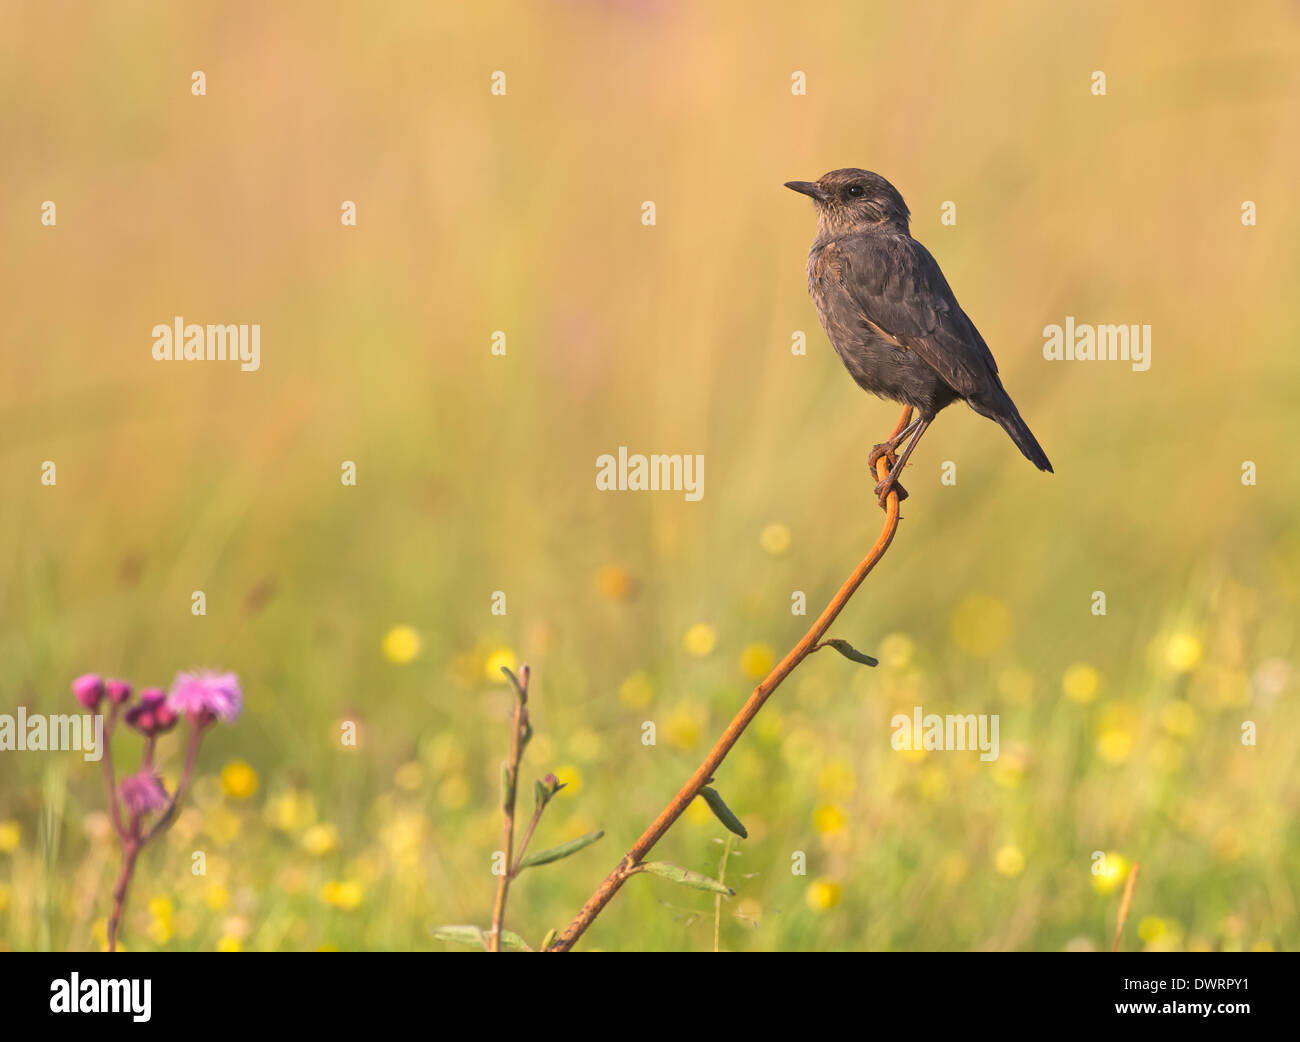 anteating chat perched on twig Stock Photo